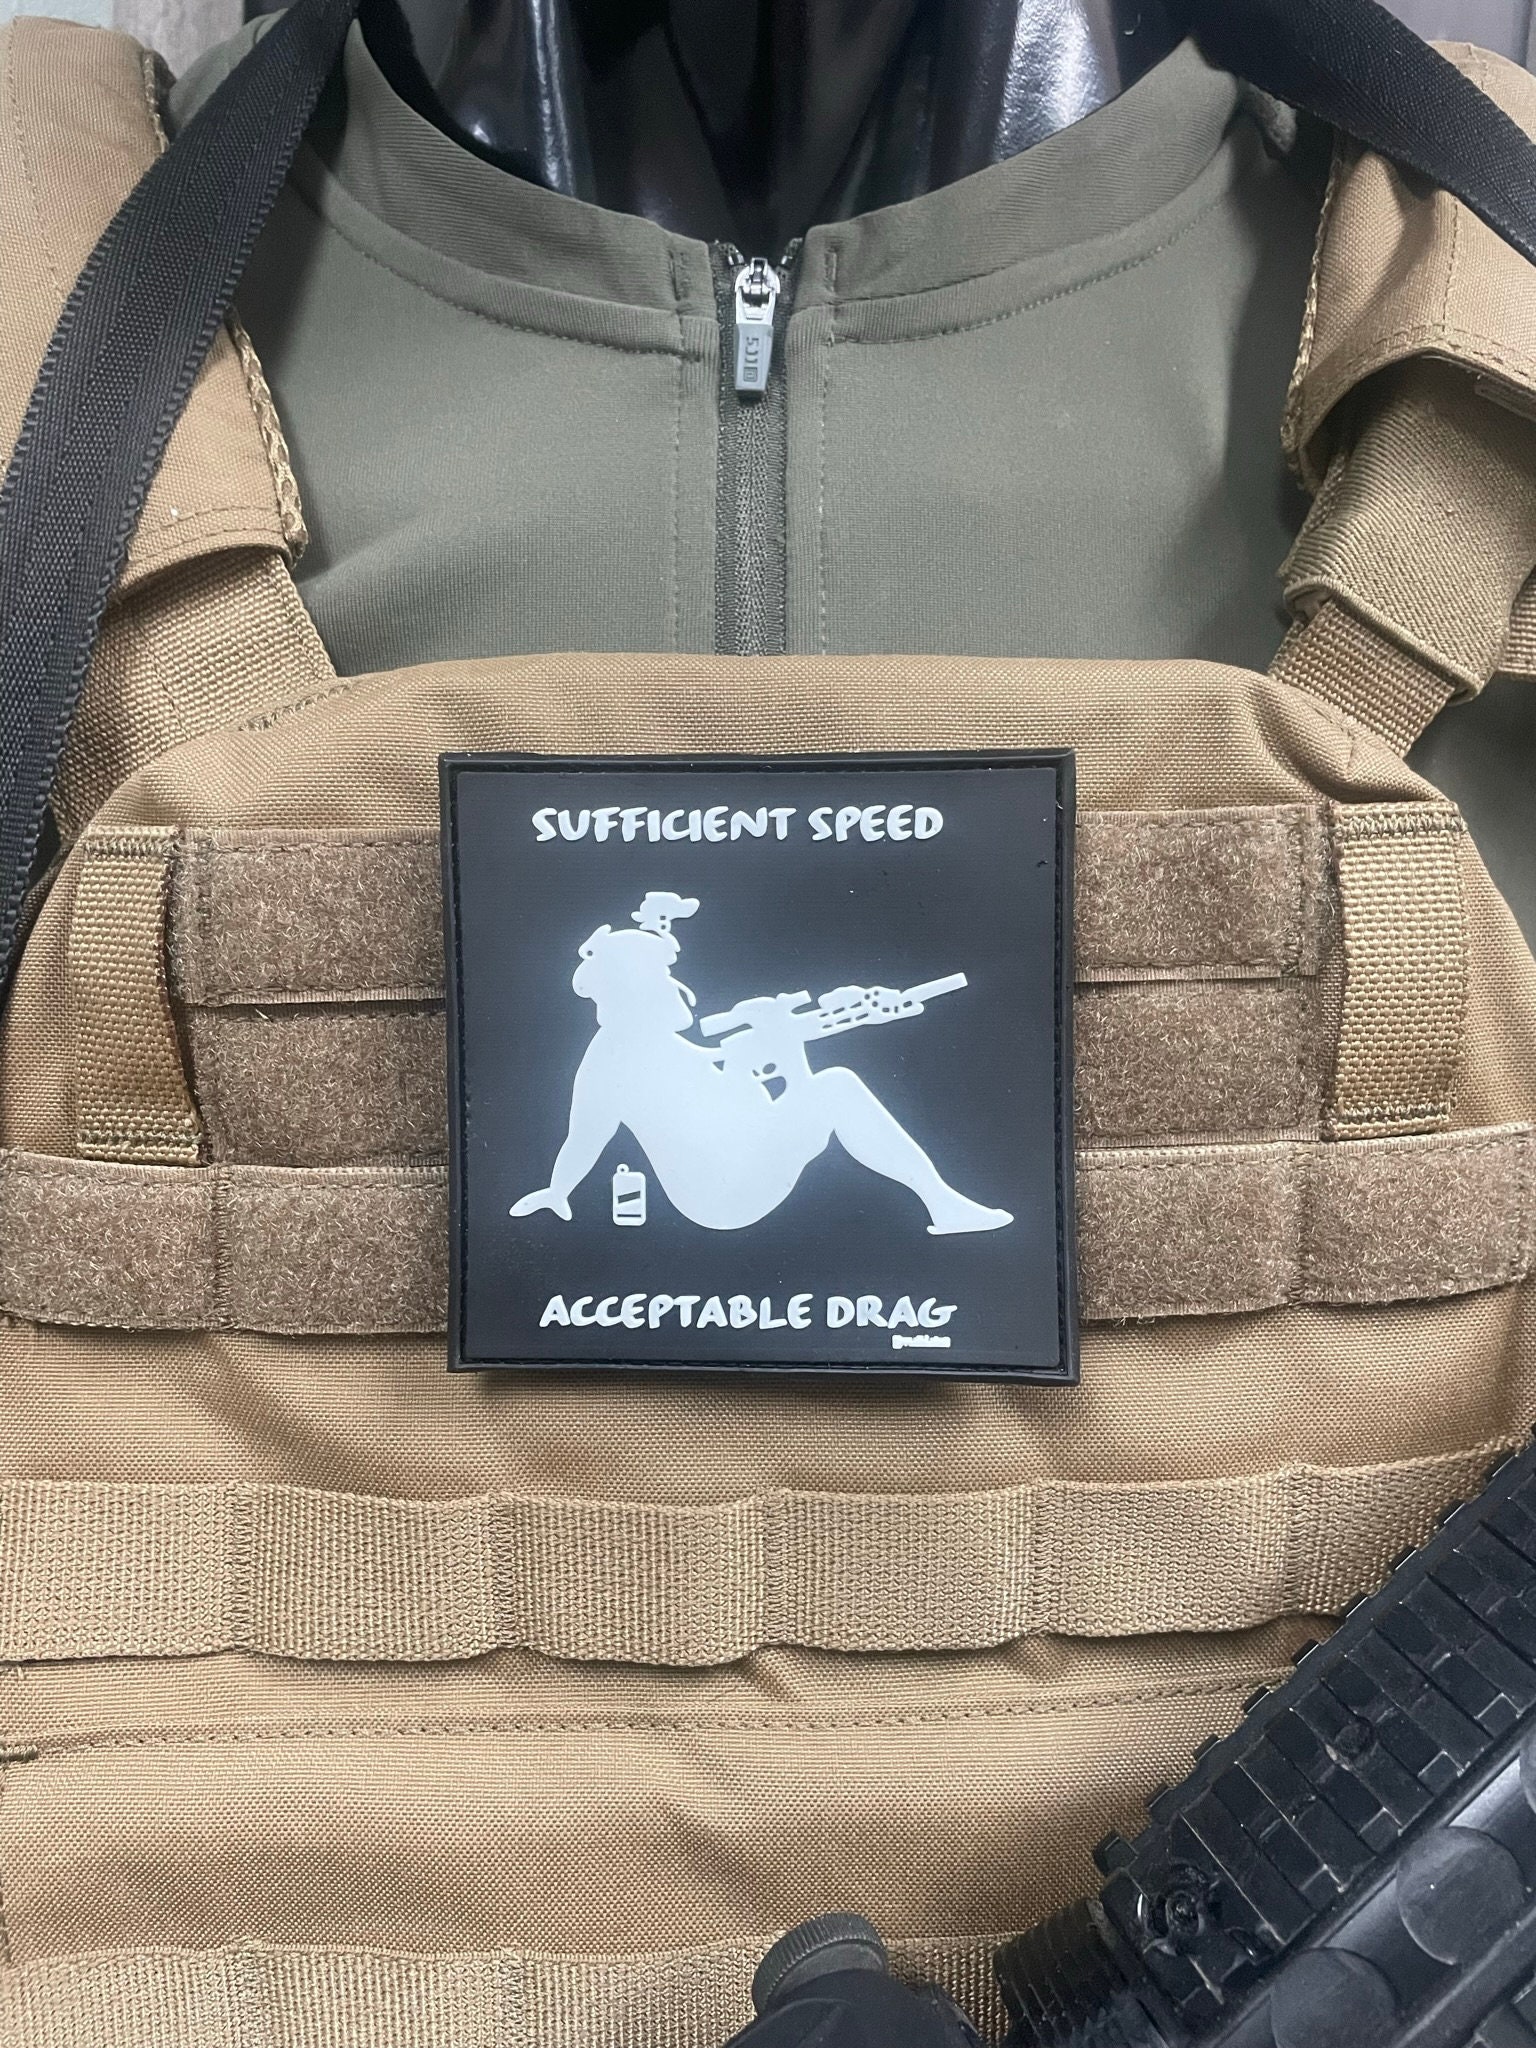 Mini Moral Plate Carrier and Patches